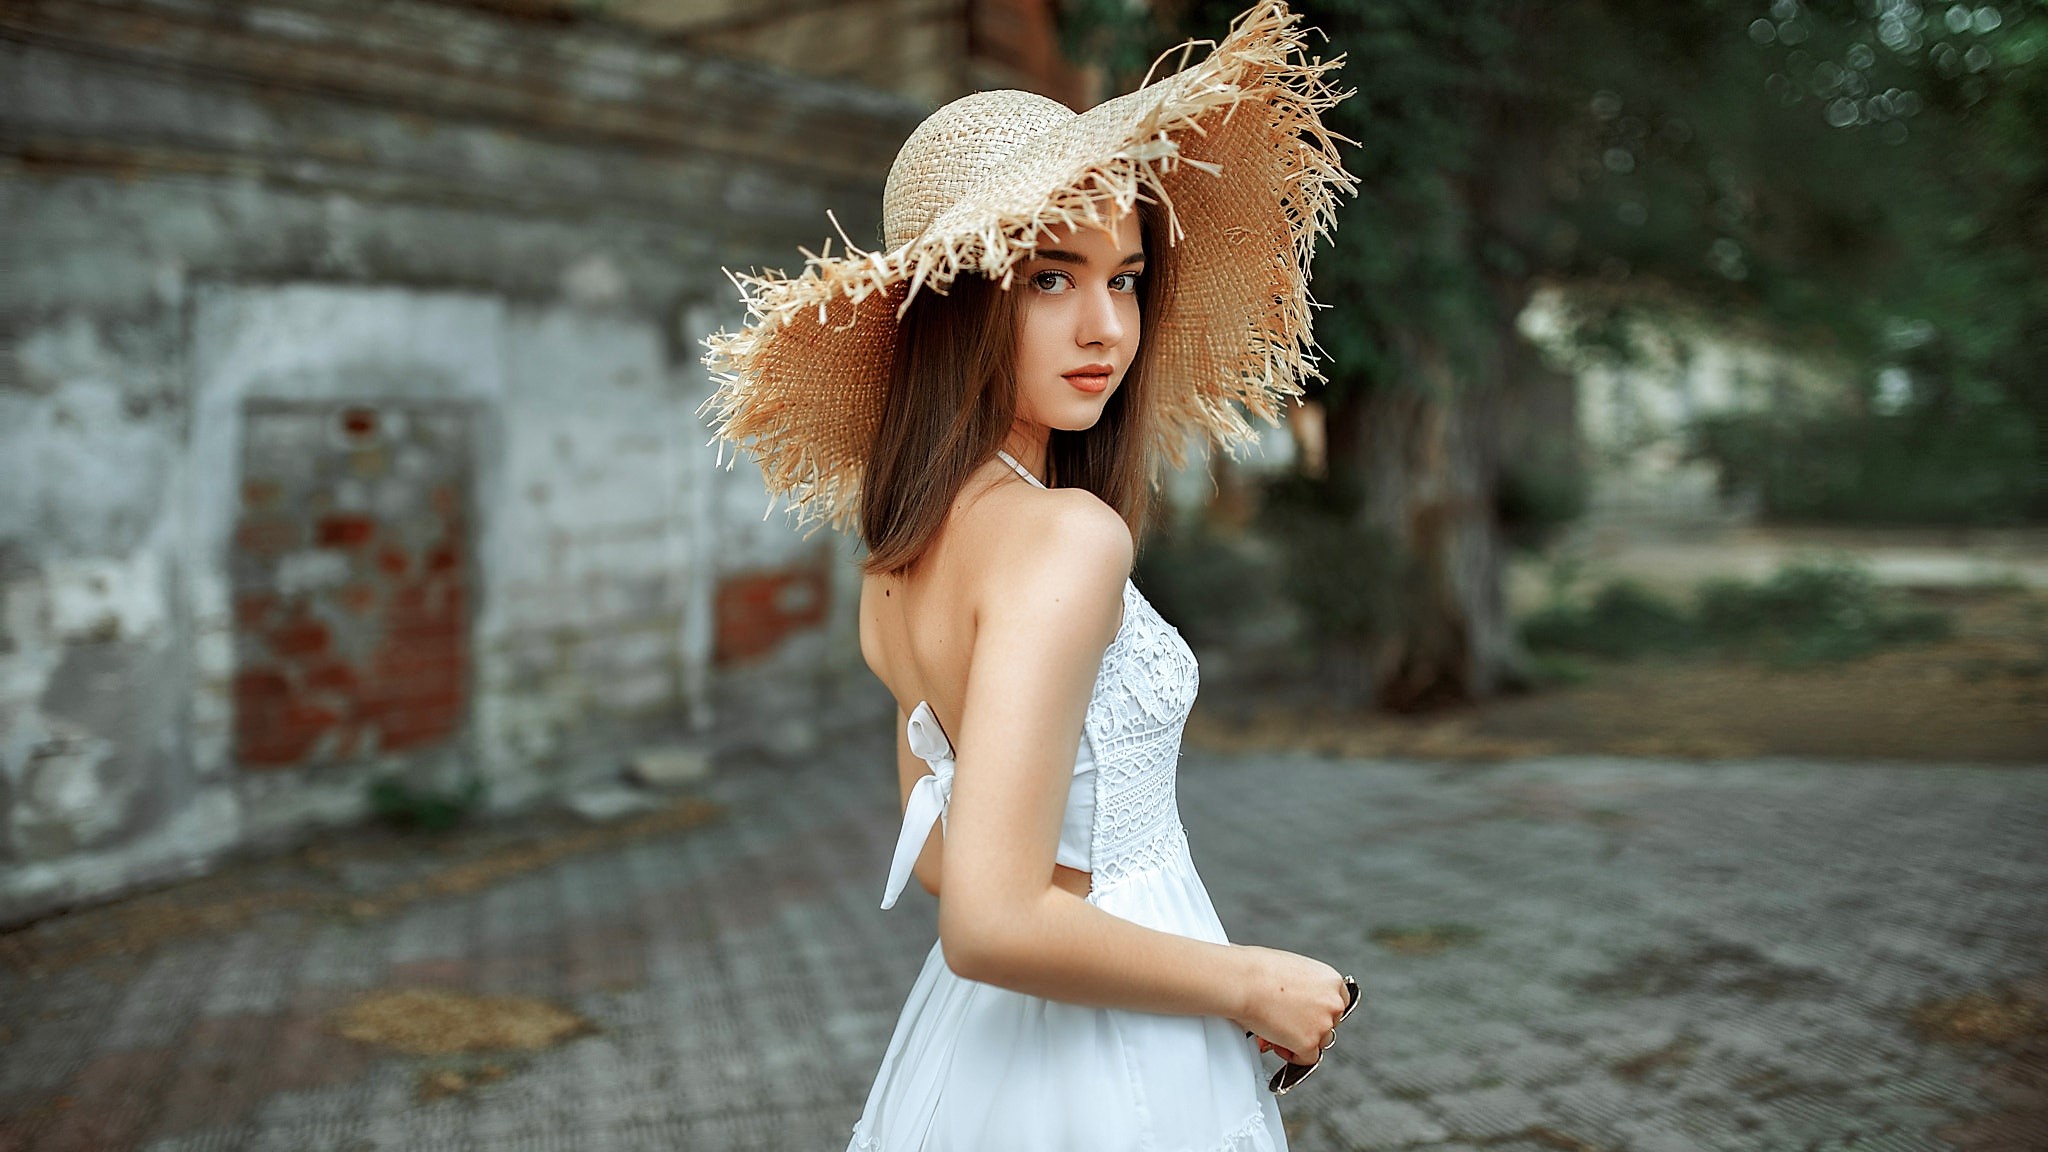 Download Wallpaper model girl dress hat white young, 2048x1152